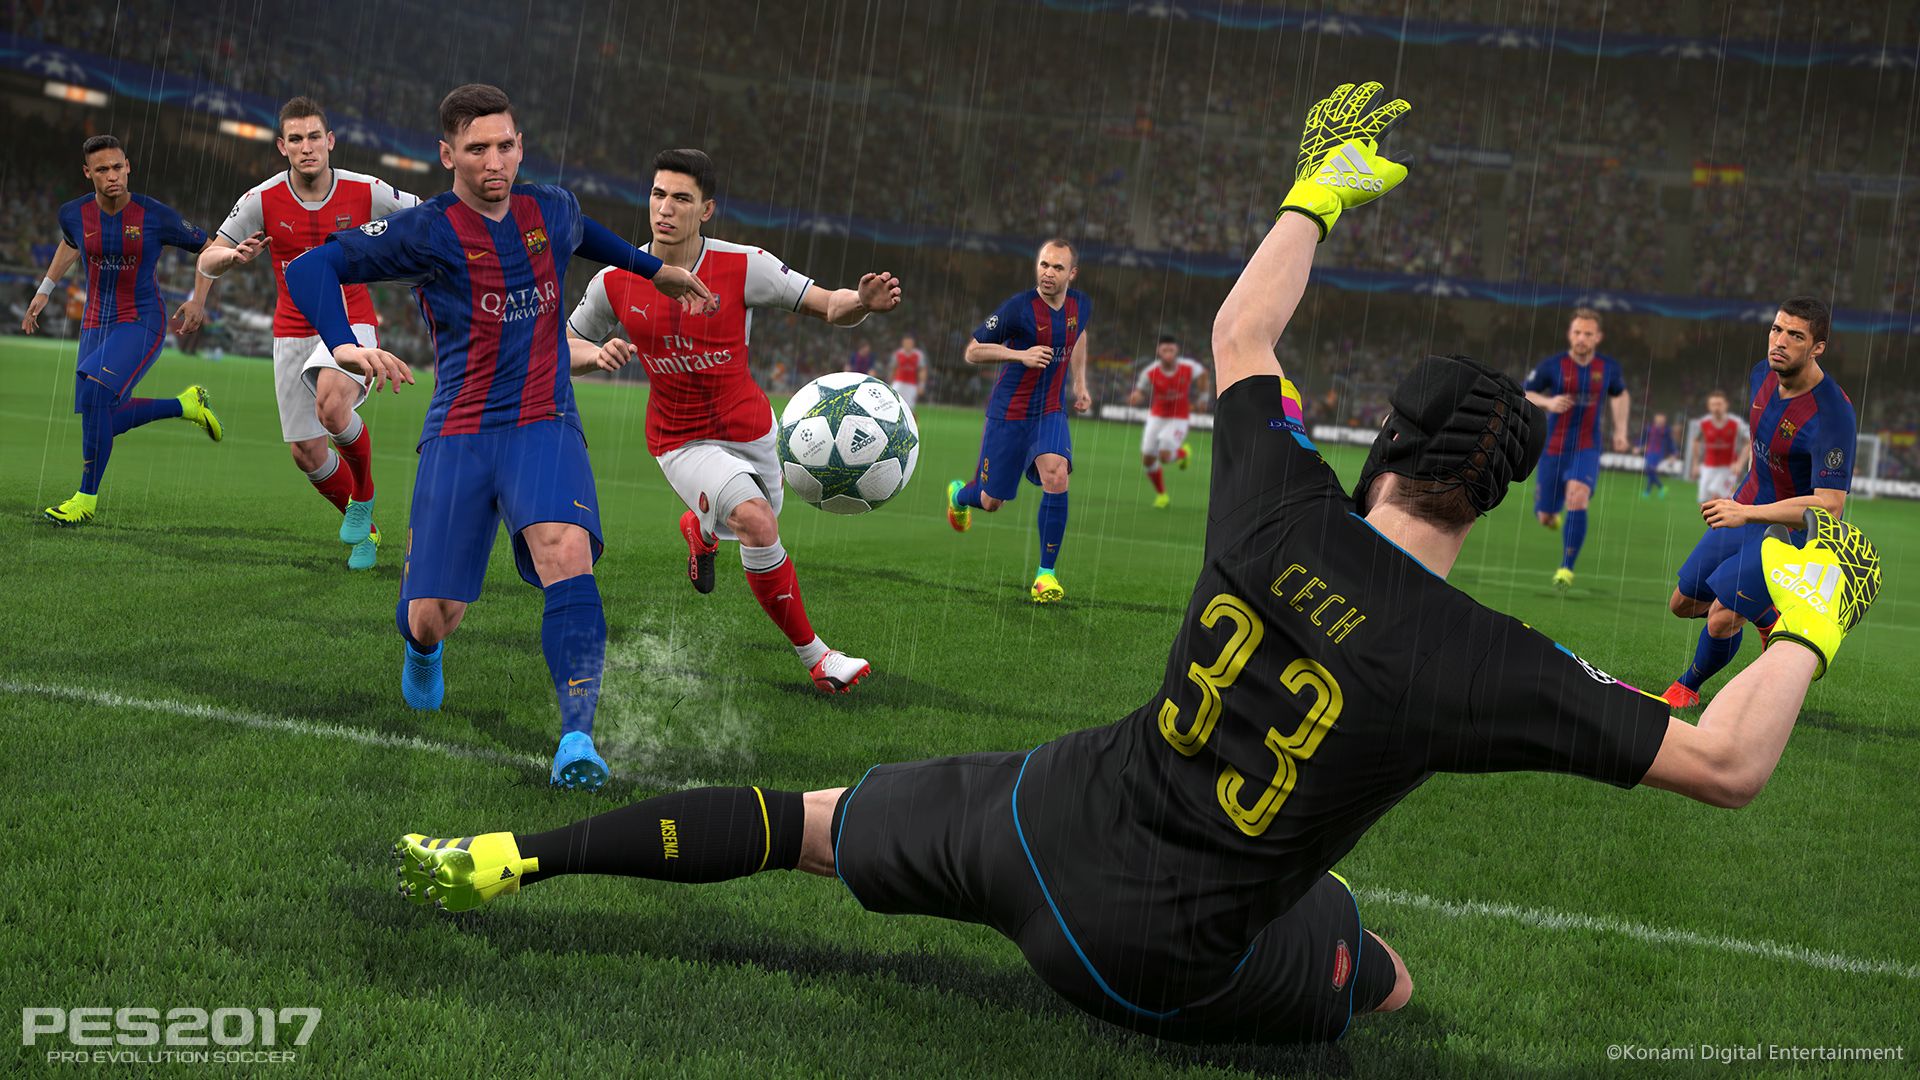 Pes 2017 is packed full of new features and the game now has an